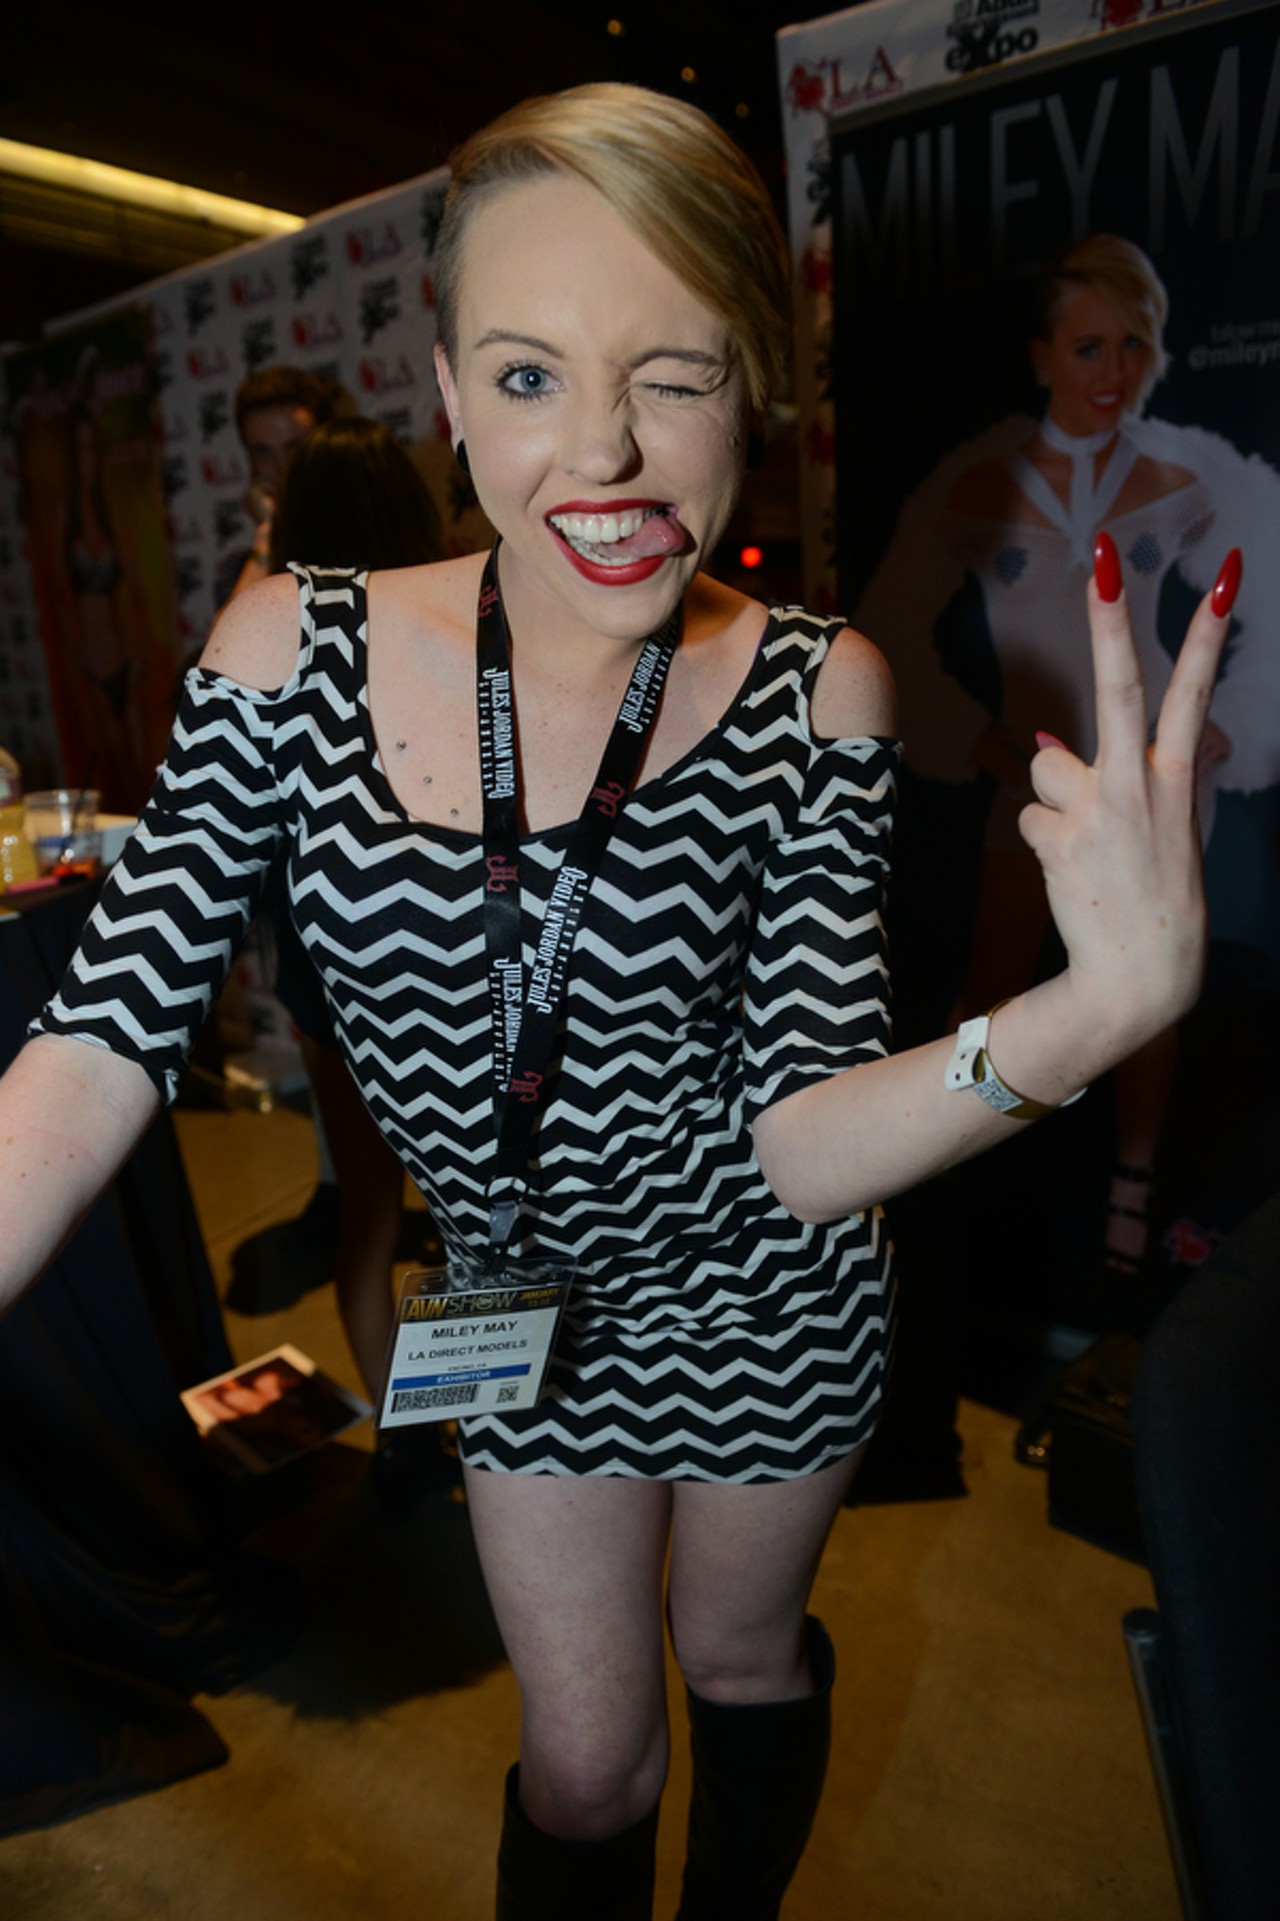 2014 Adult Entertainment Expo Gets Naughty in Vegas (NSFW)